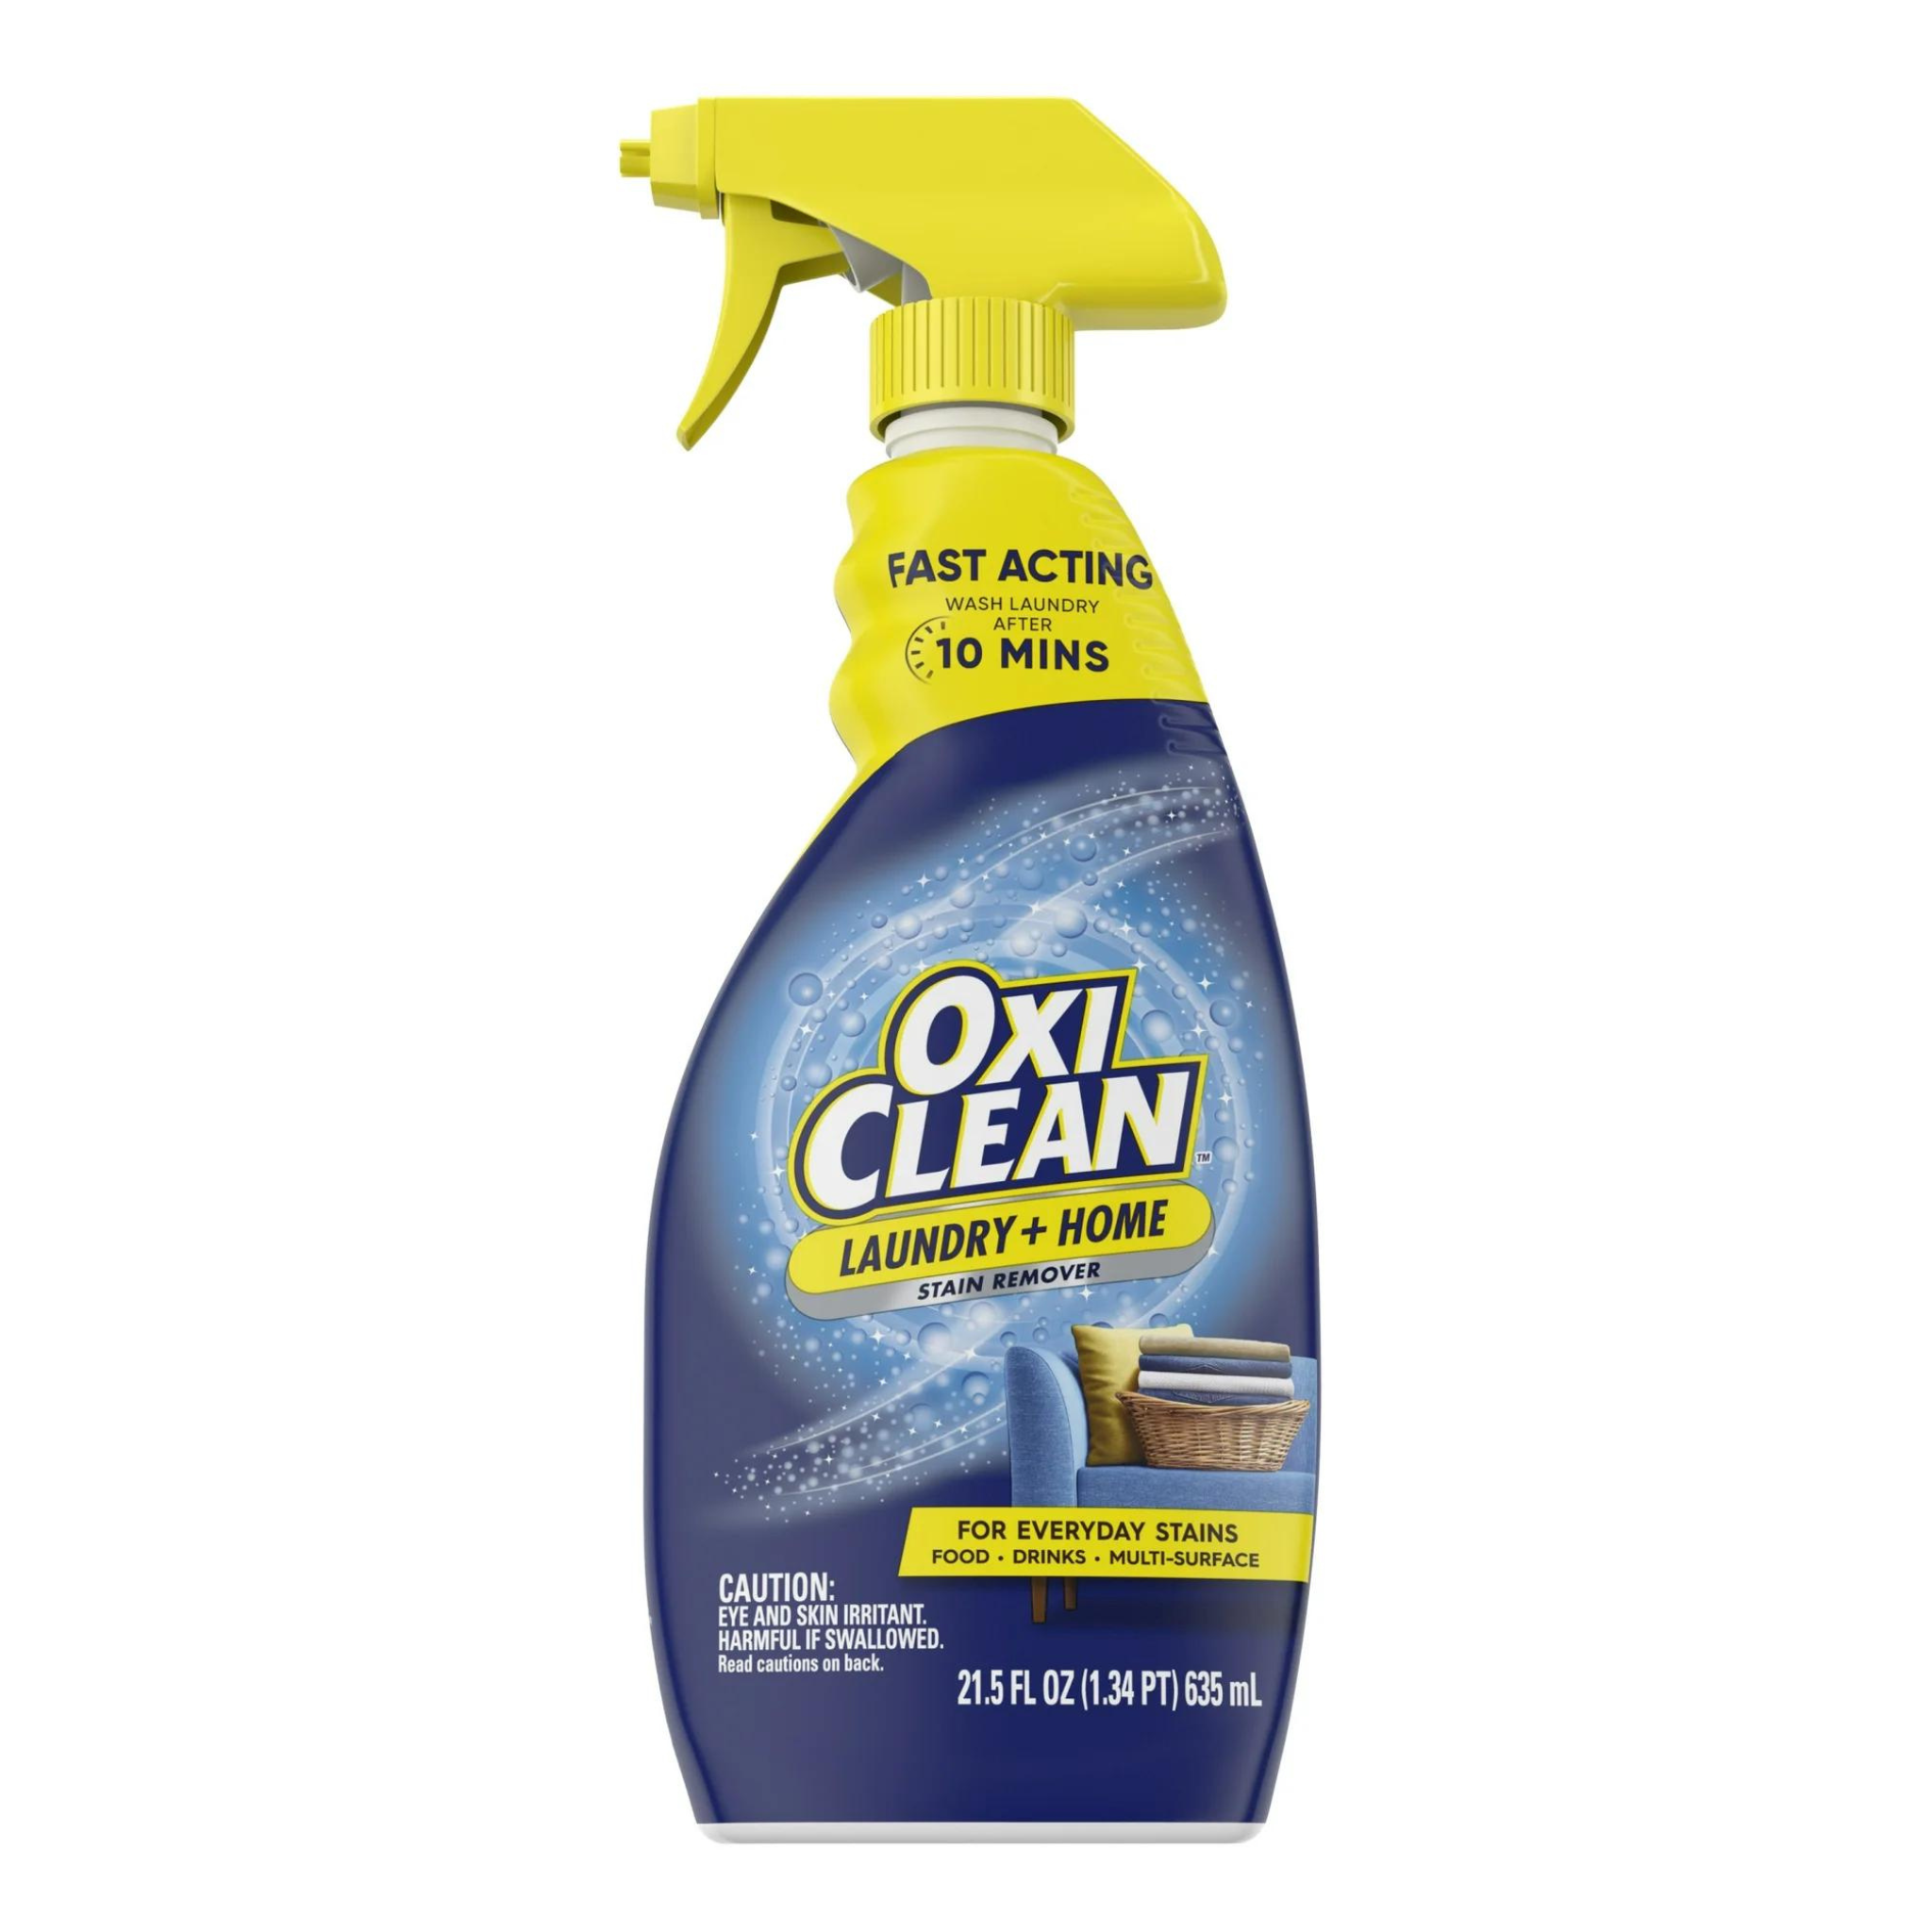 OxiClean 21.5 fl oz Laundry Stain Remover Spray + $1.50 Walmart Cash